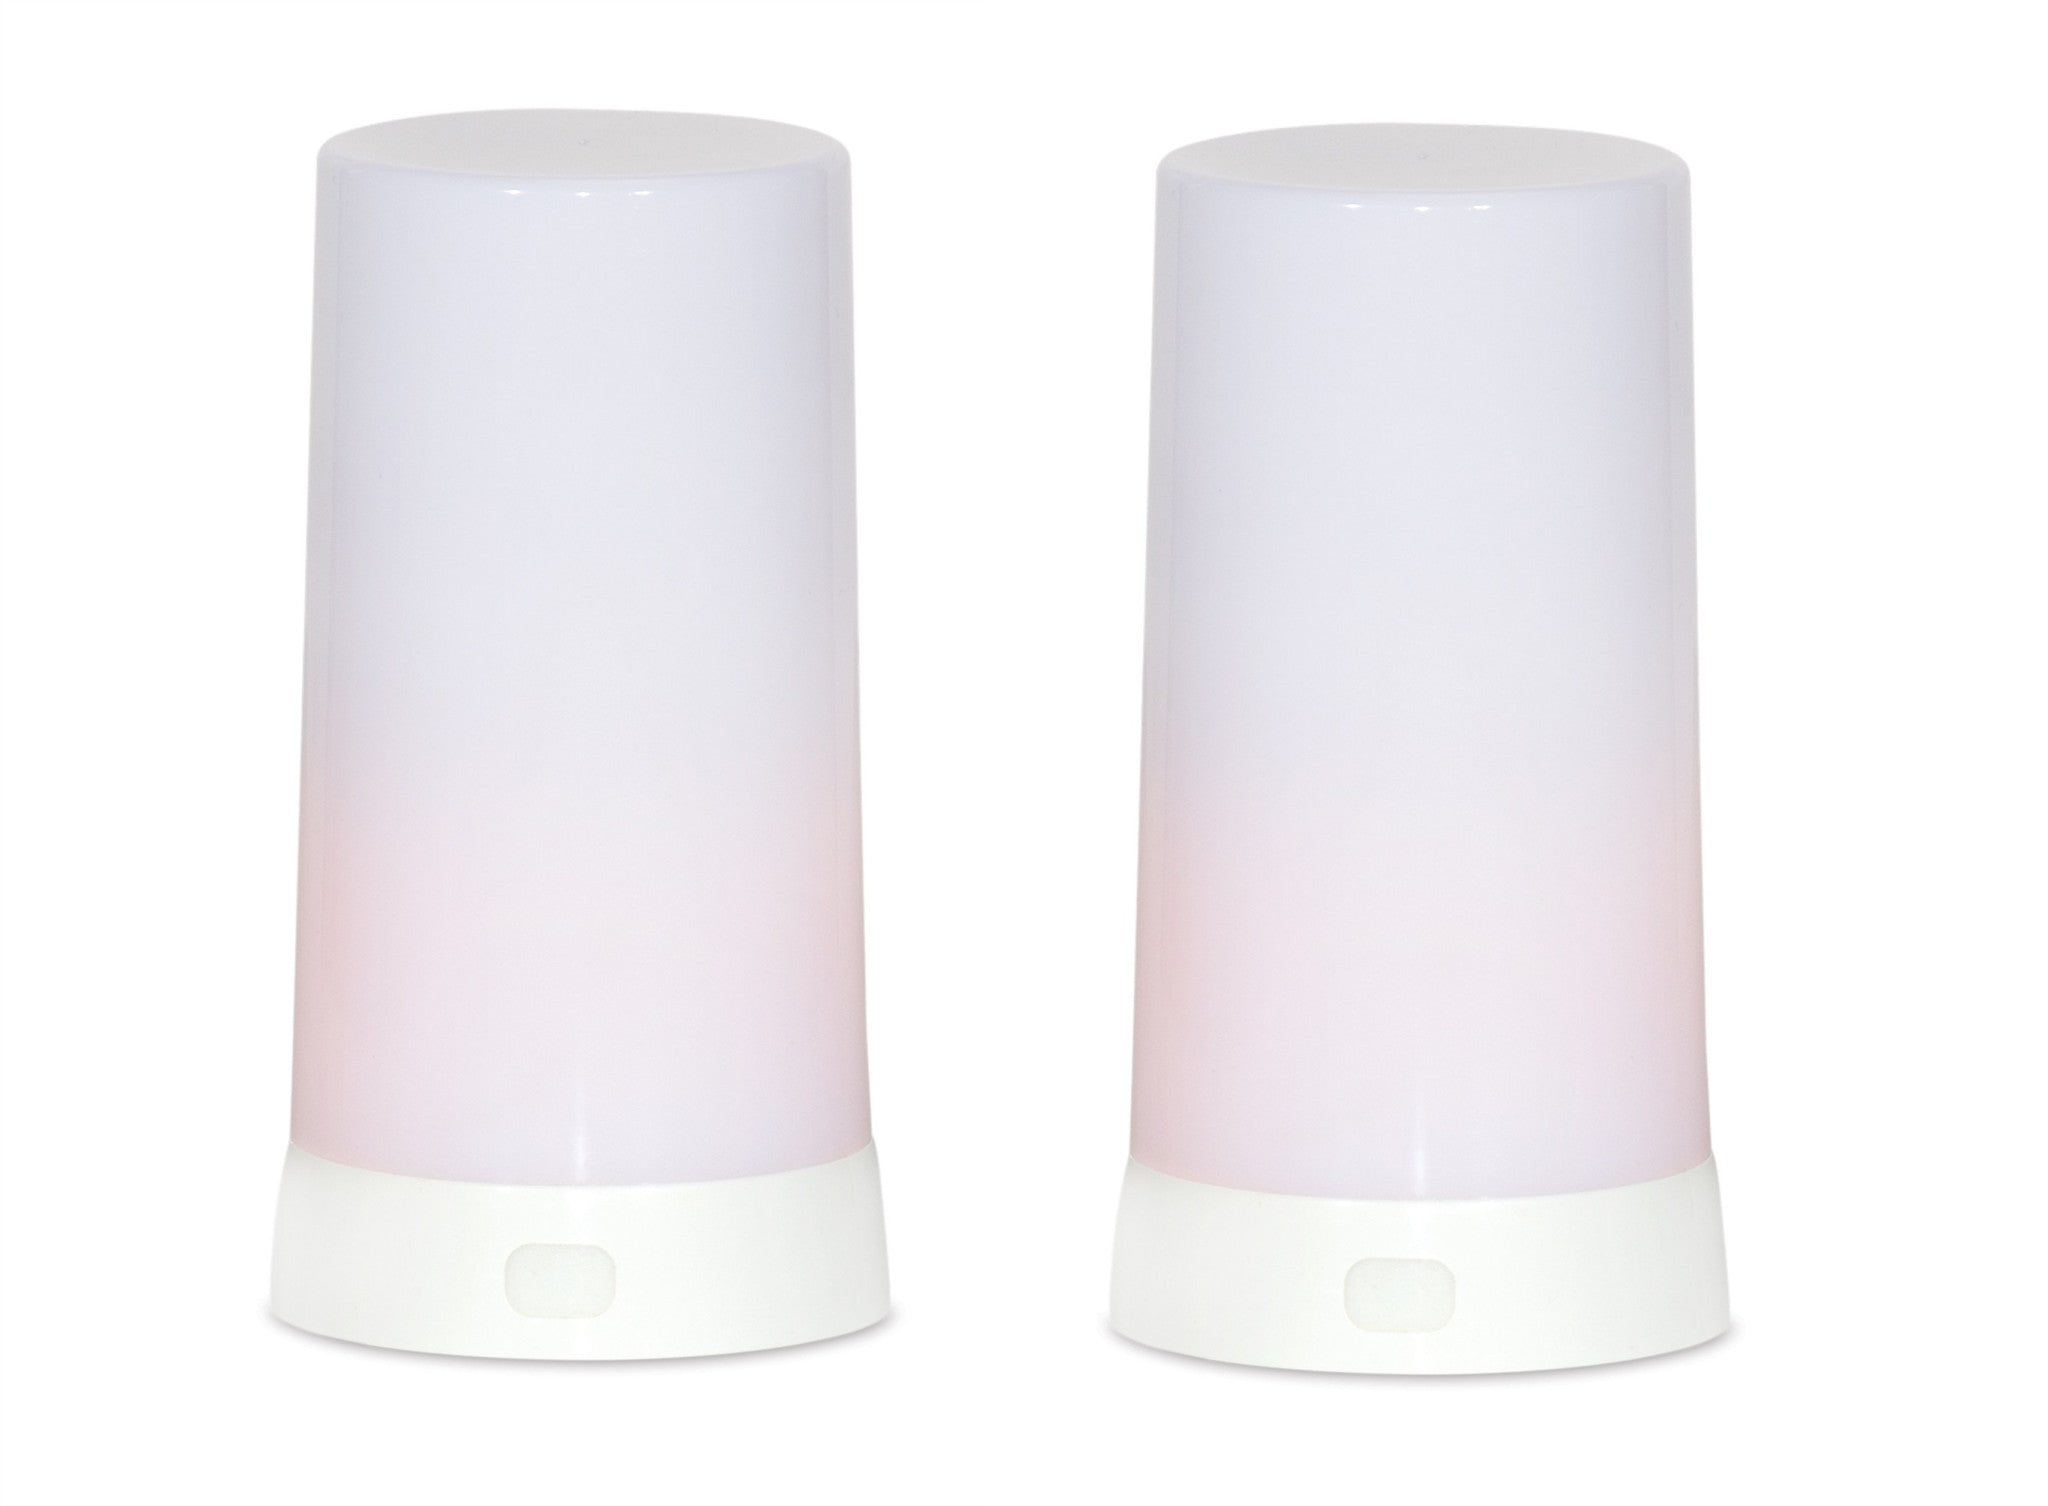 Set of Two White Flameless Pillar Candle